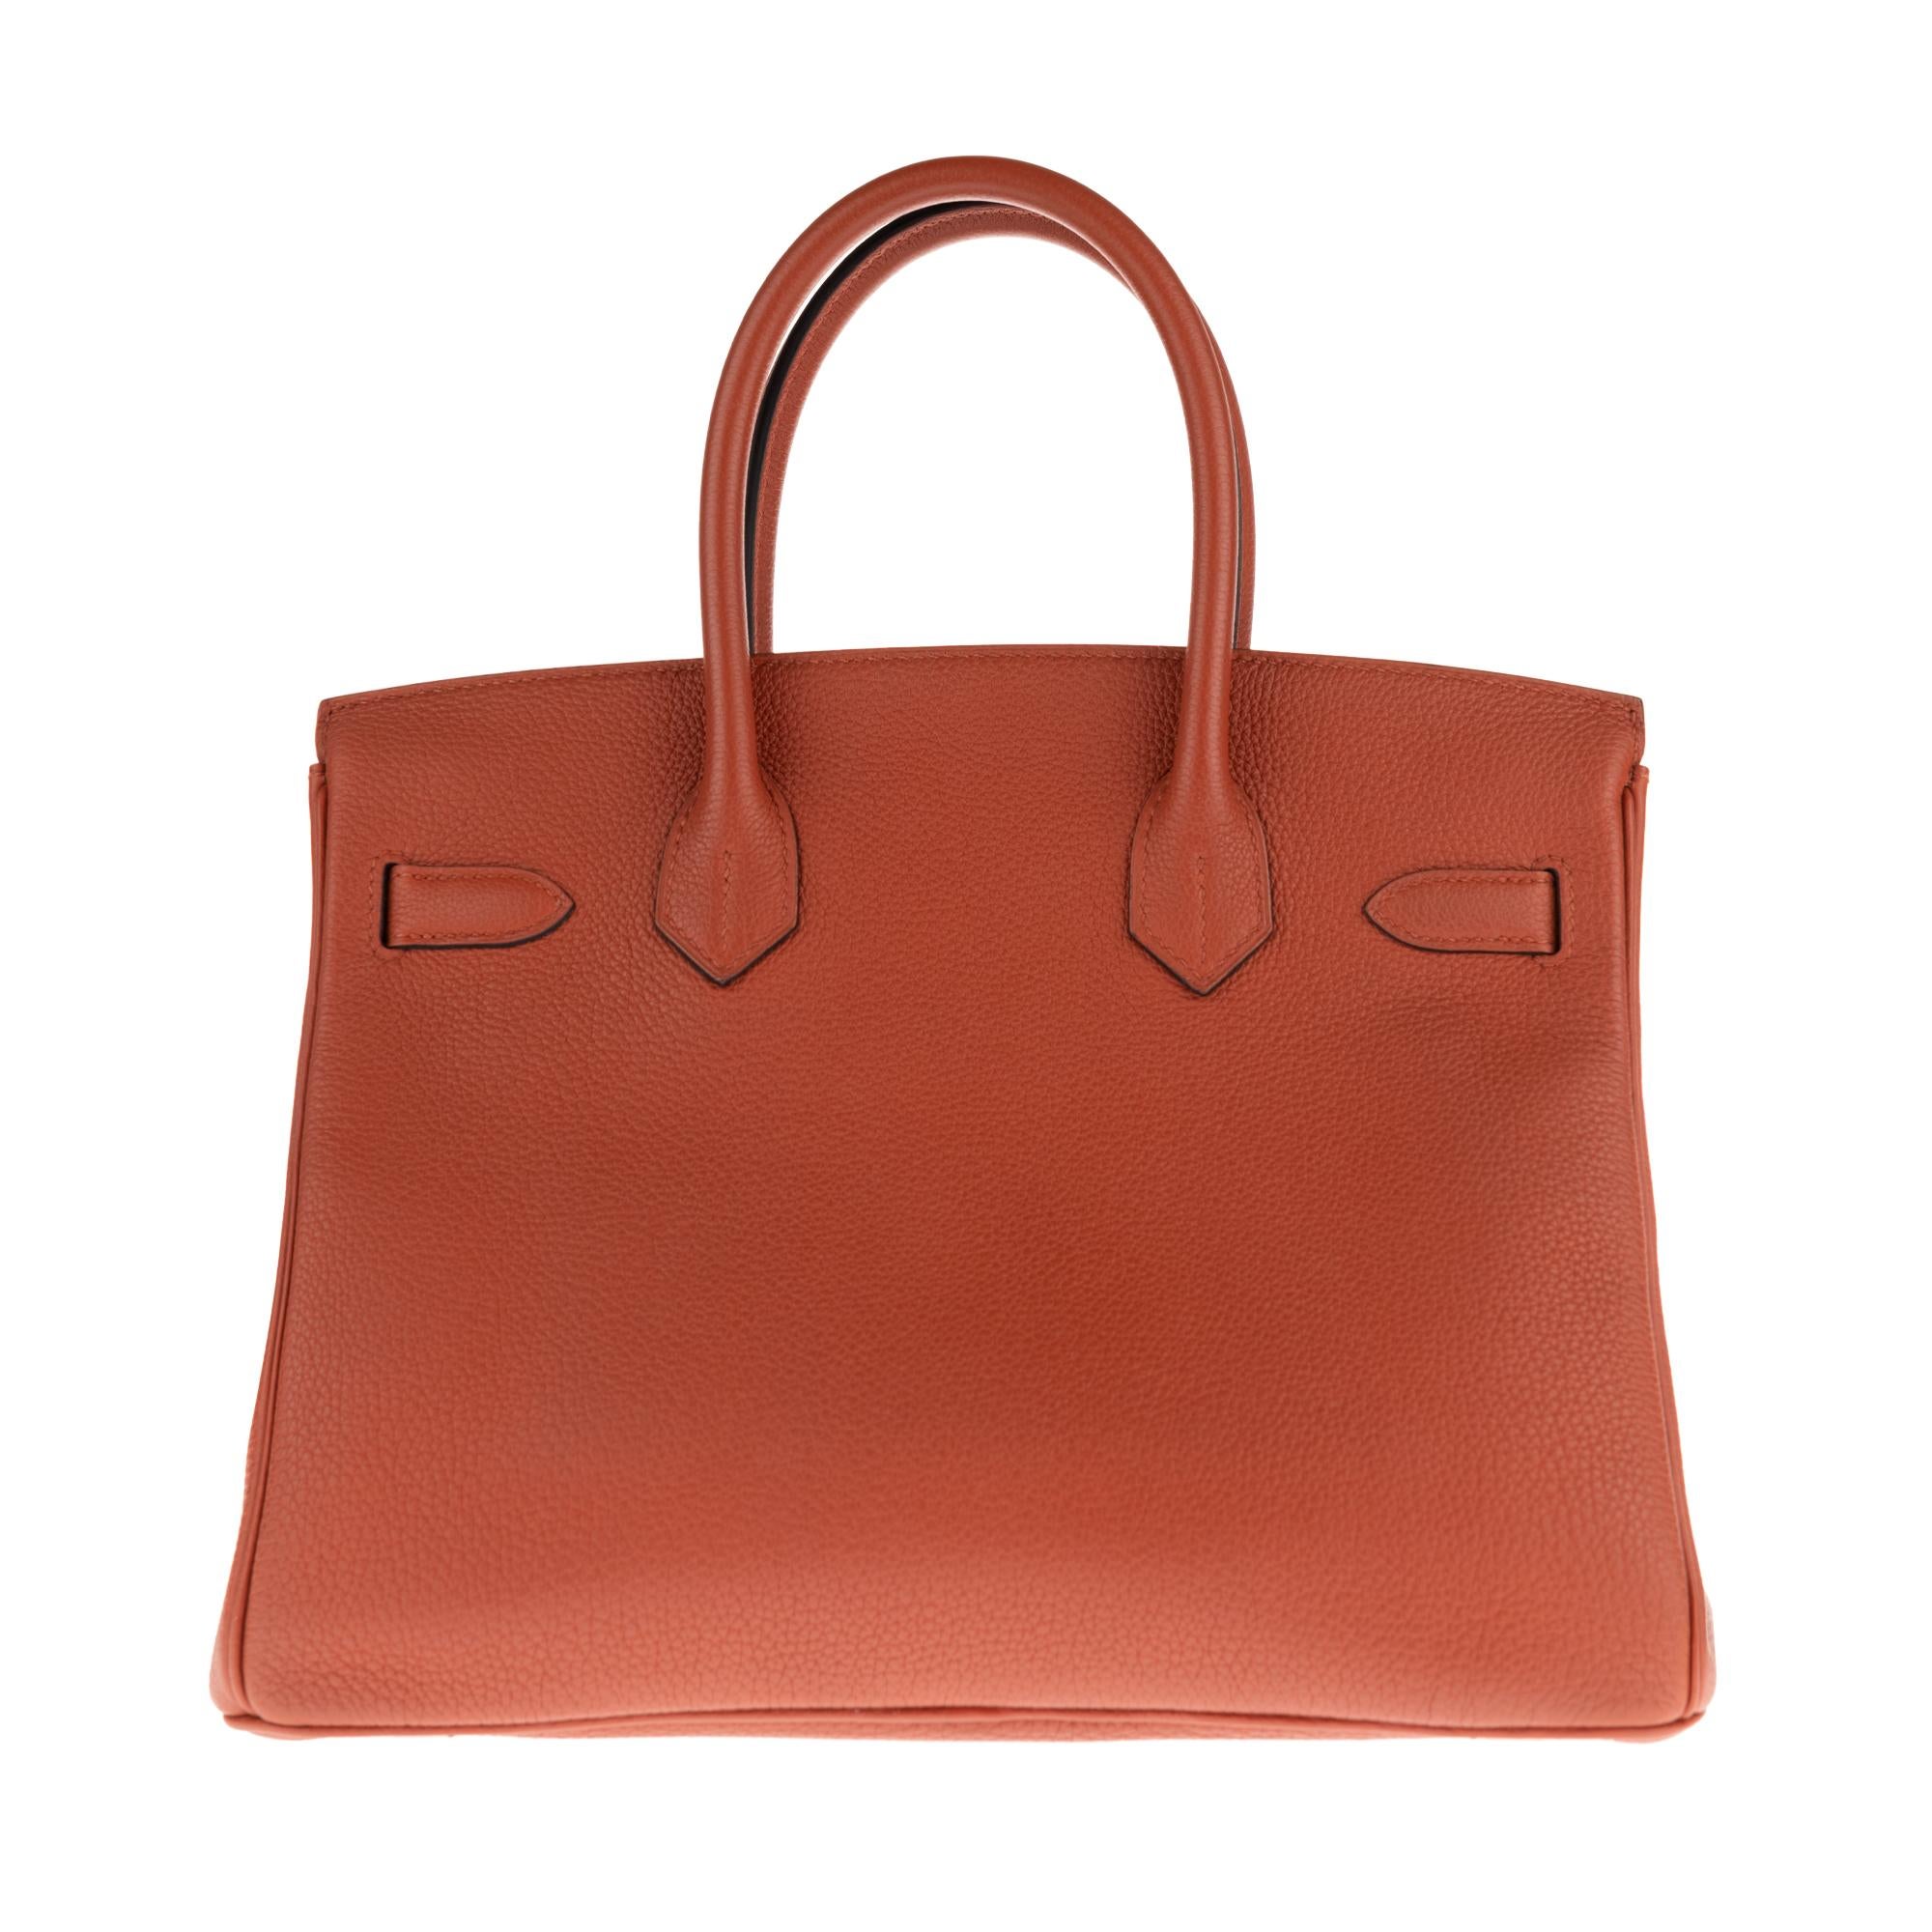 Beautiful Hermes Birkin Handbag 30 cm in Togo Leather Color cuivre (copper) , Palladium Silver Metal hardware, Double Handle cuivre Leather Allowing a Hand Carrying.

Closure by flap.
Inner lining in cuivre leather, one zipped pocket, one veneered